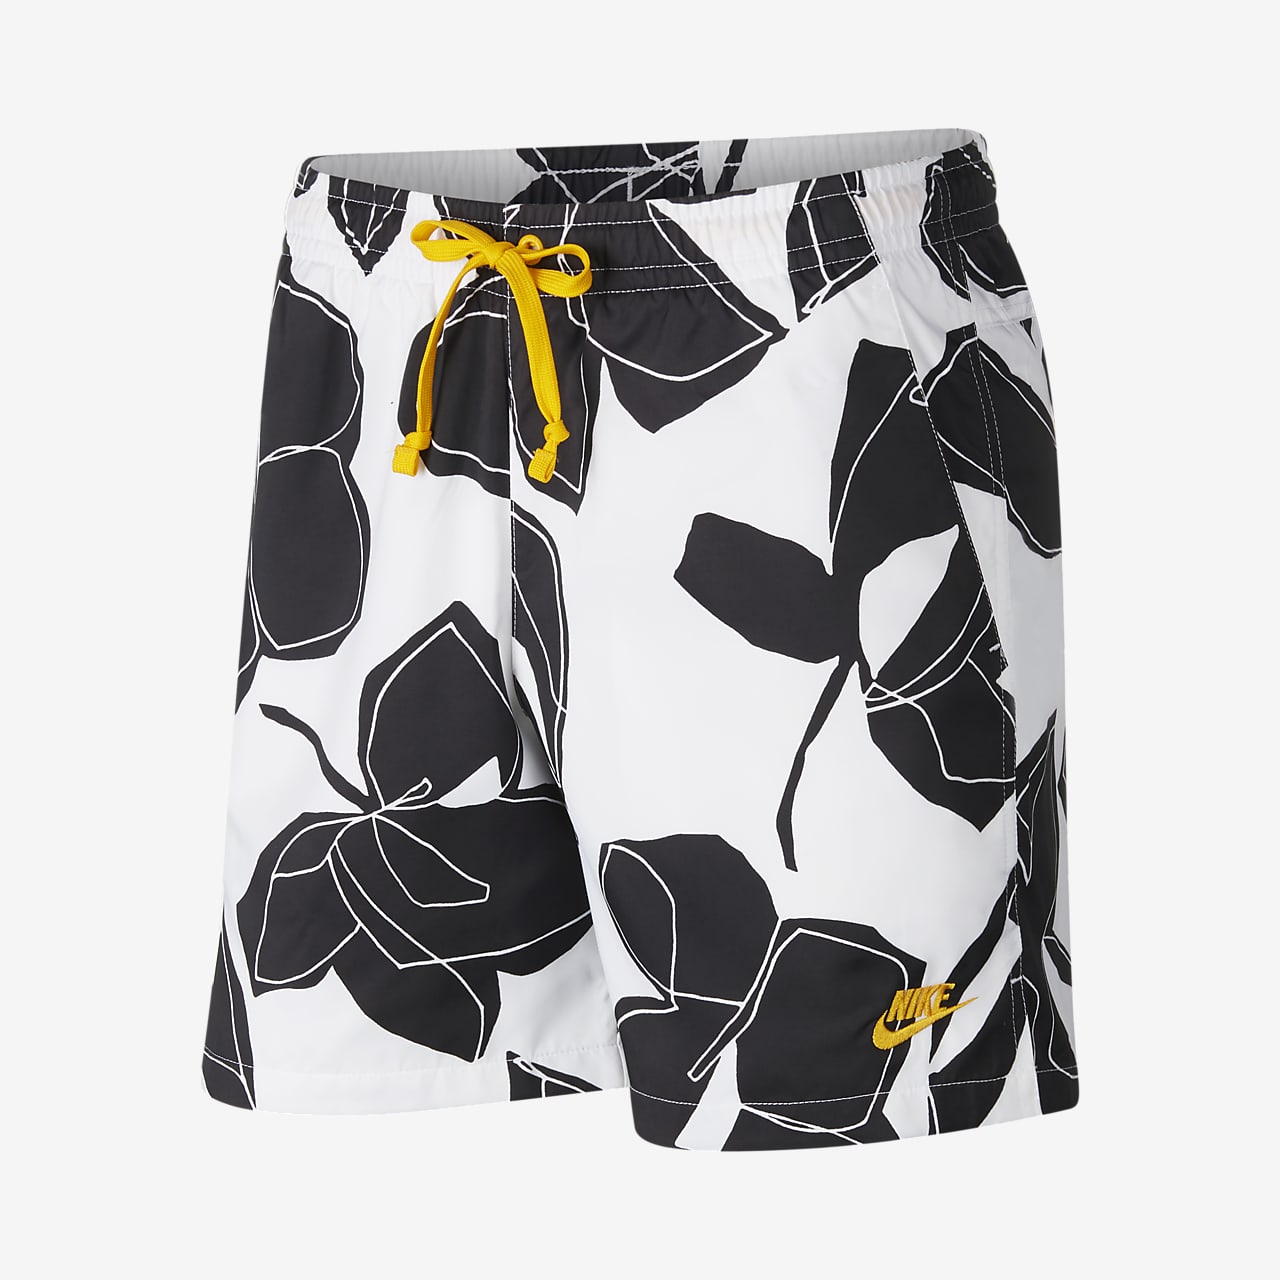 Woven Floral Shorts. Nike ID